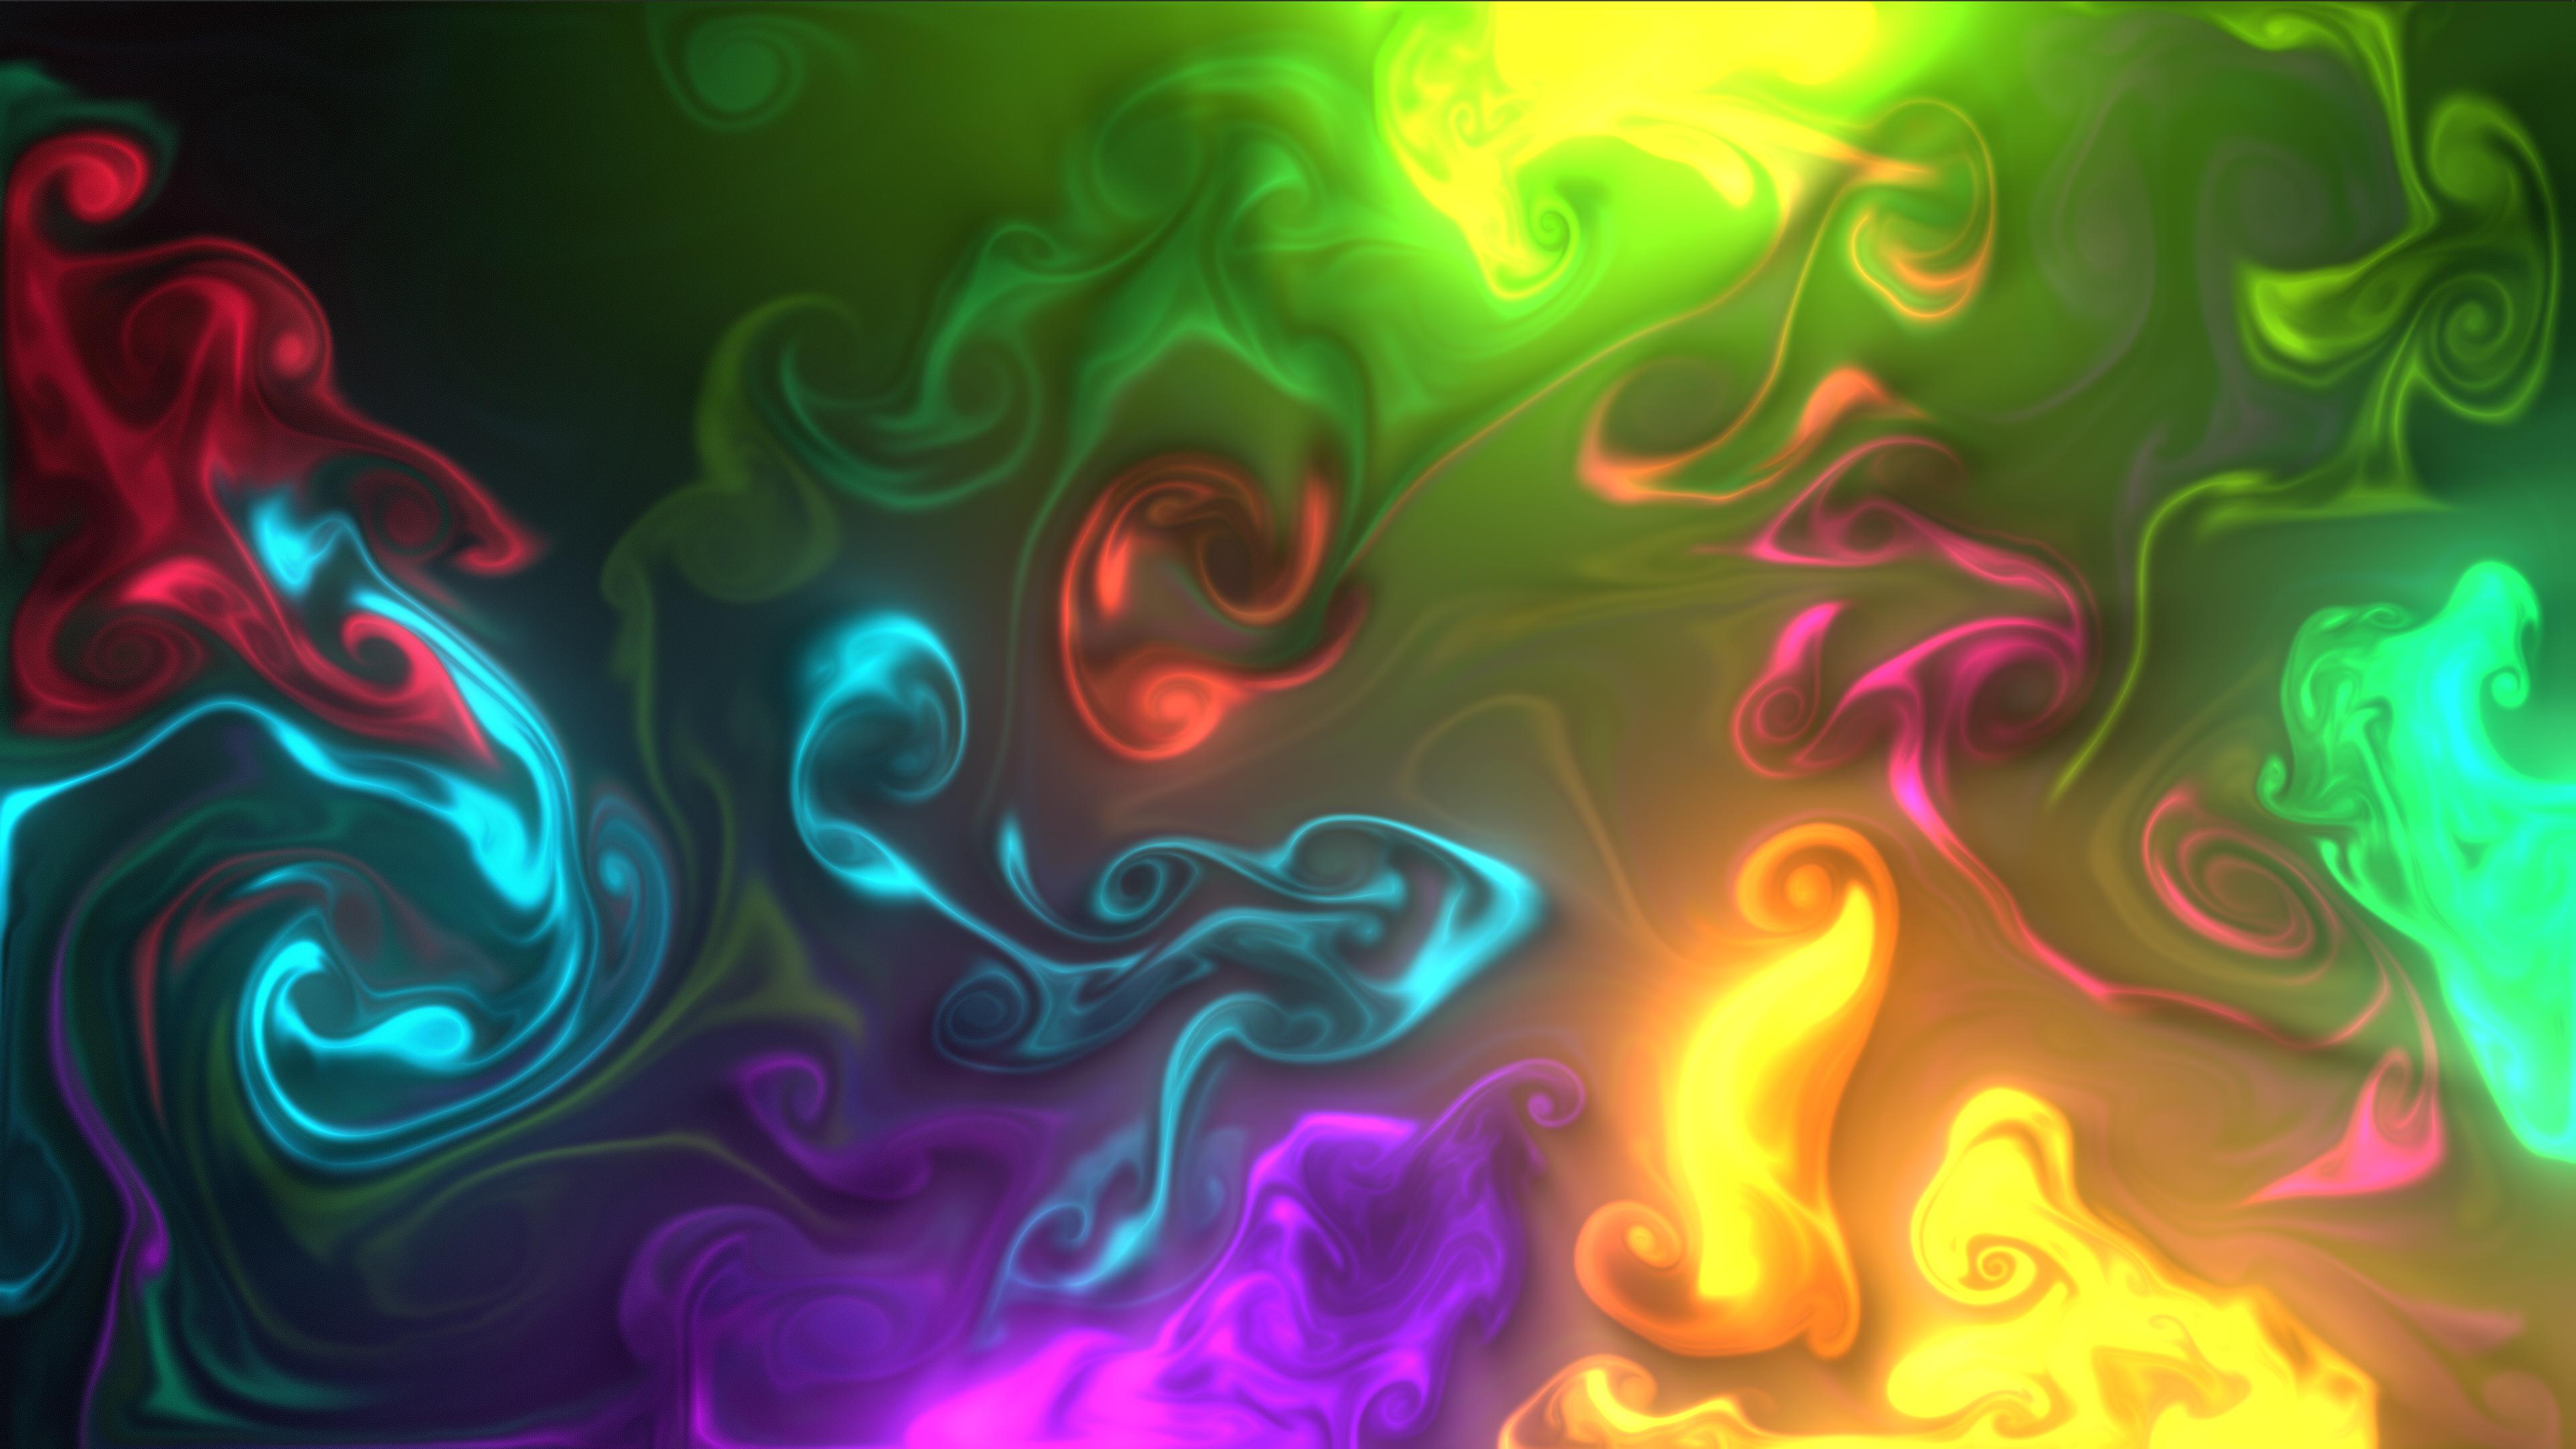 Fluid 4K wallpapers for your desktop or mobile screen free and easy to  download